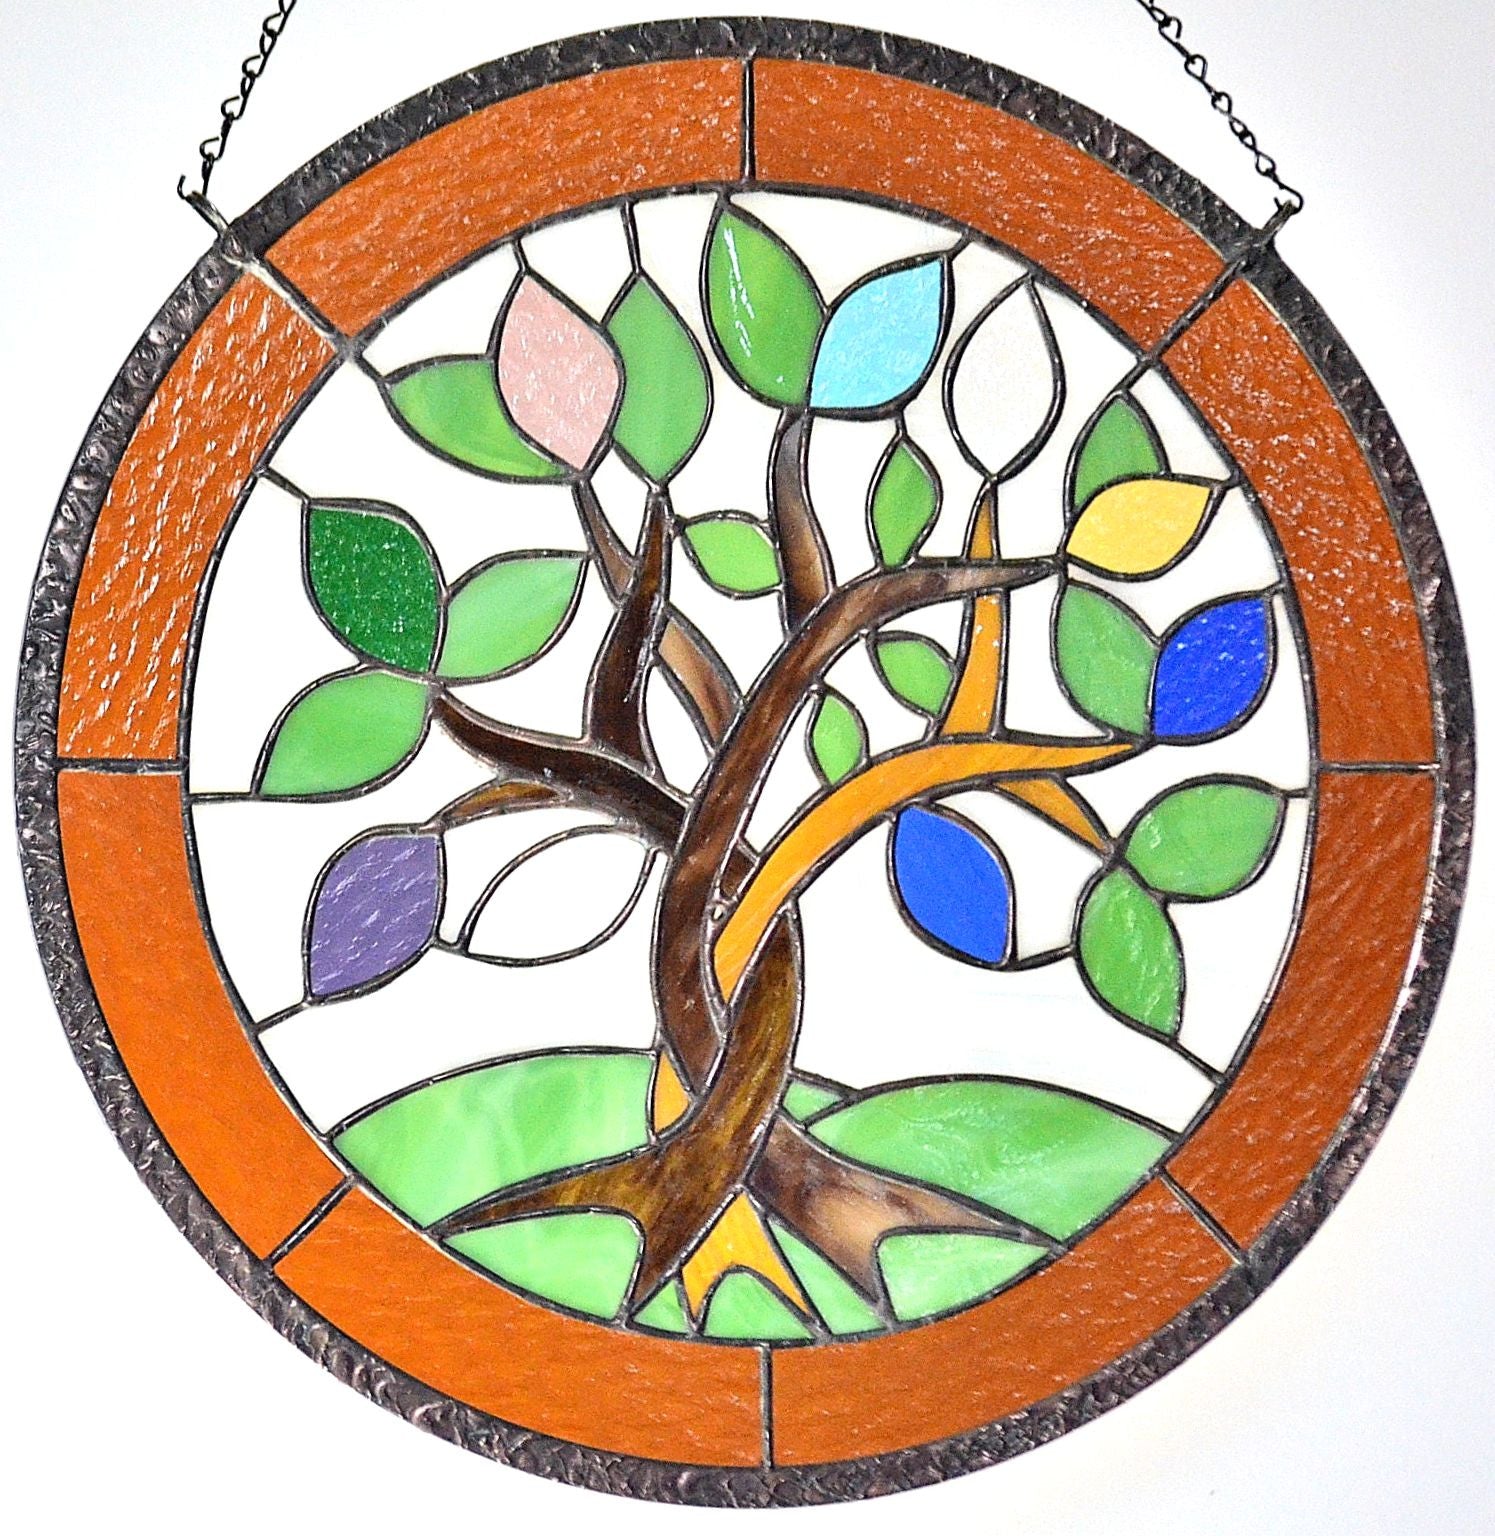 Hanging Stained Glass Window Panel of Family Tree